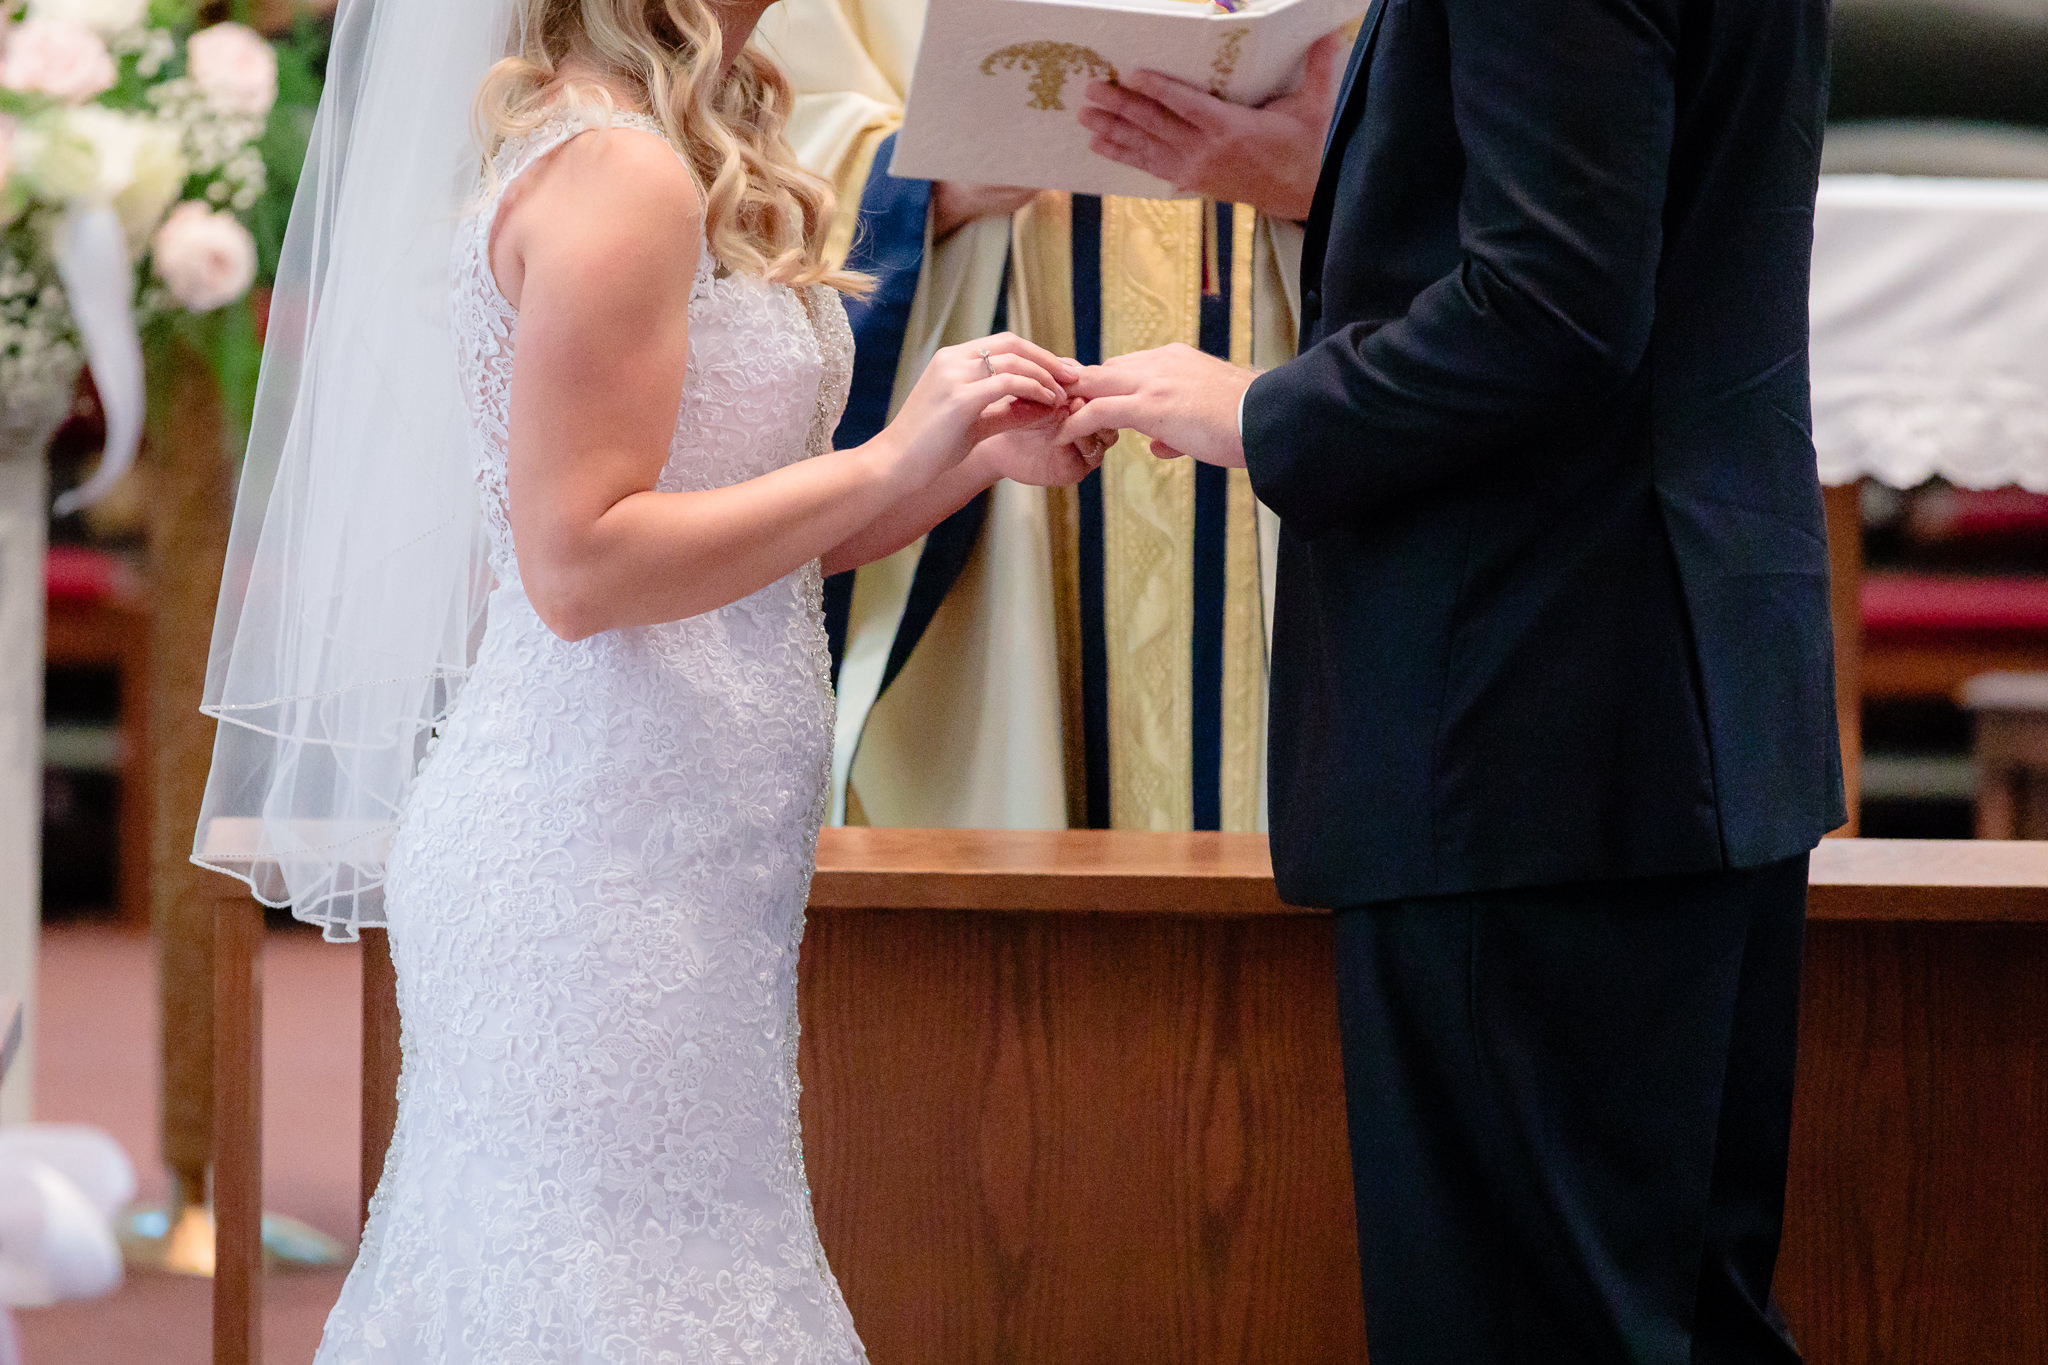 Bride puts groom's wedding band on his finger at Duquesne University Chapel of the Holy Spirit